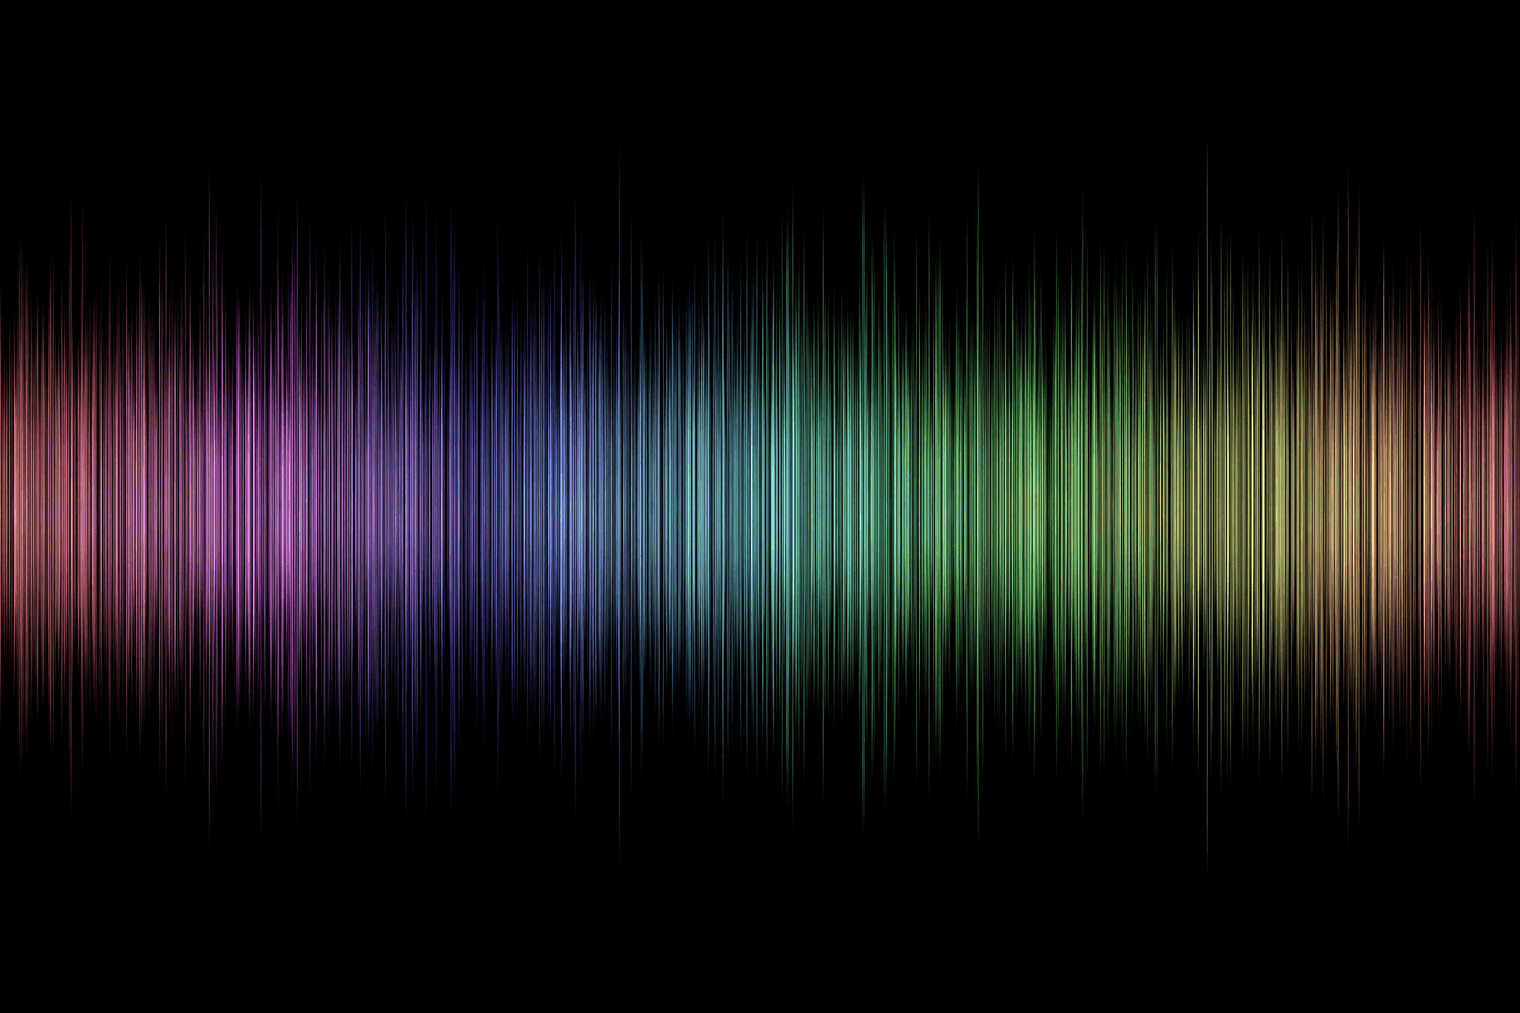 AN ECG OF SOUND WITH RAINBOW COLORS